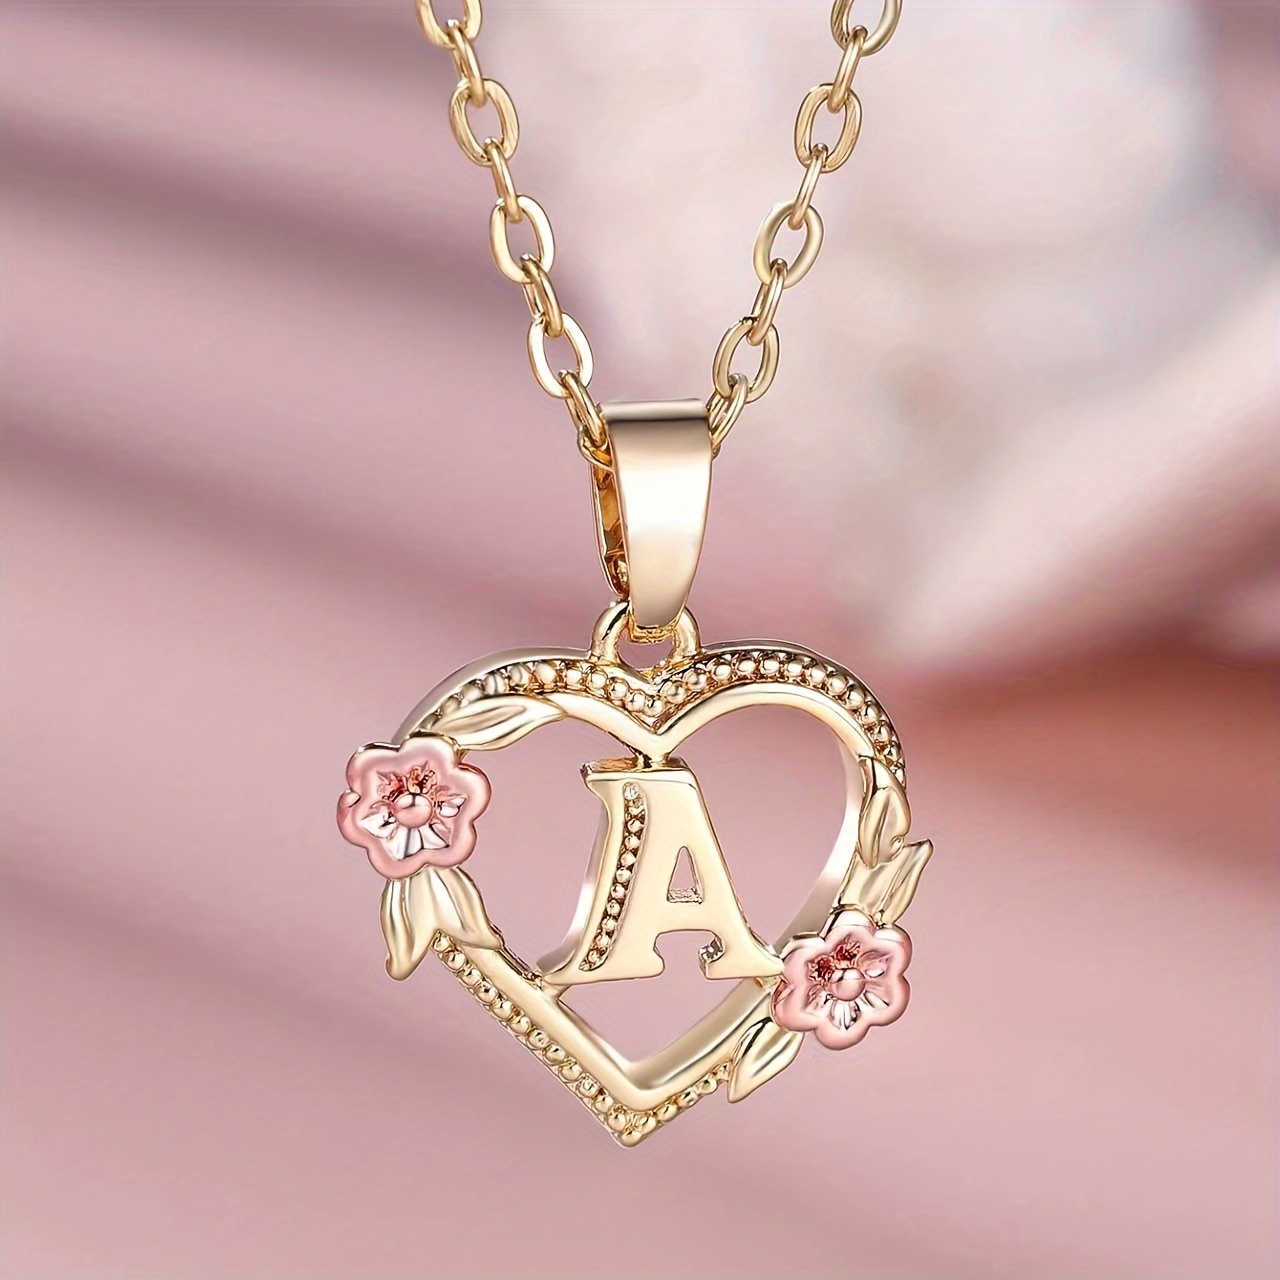 2023 New Dainty Silver Initial Necklaces for Women Gold Filled Layered  Silver Necklaces for Women AZ 26 Alphabet Initial Necklaces for Teen Girls